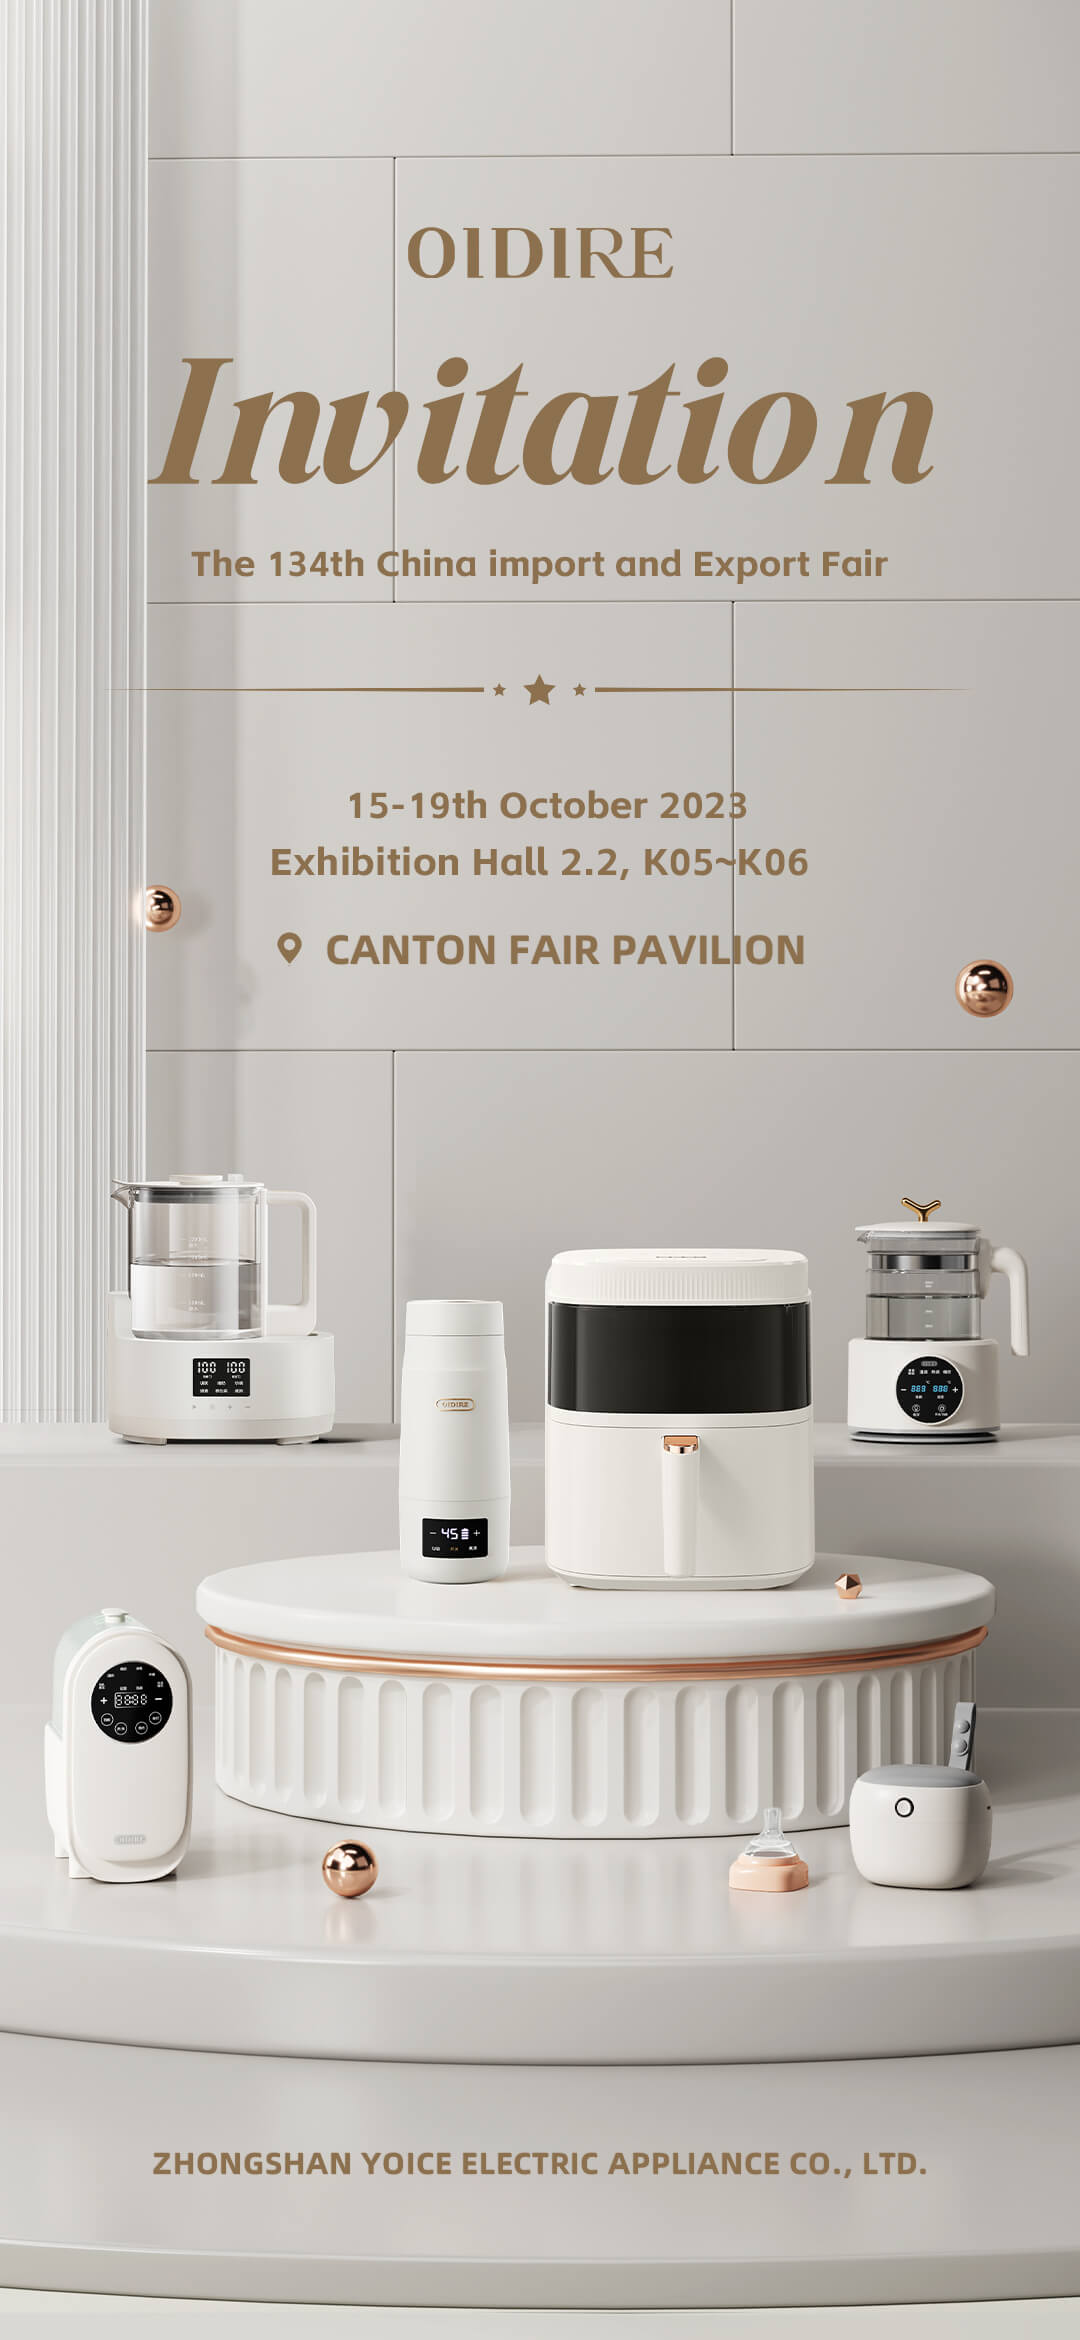 Welcome to the 134th canton fair